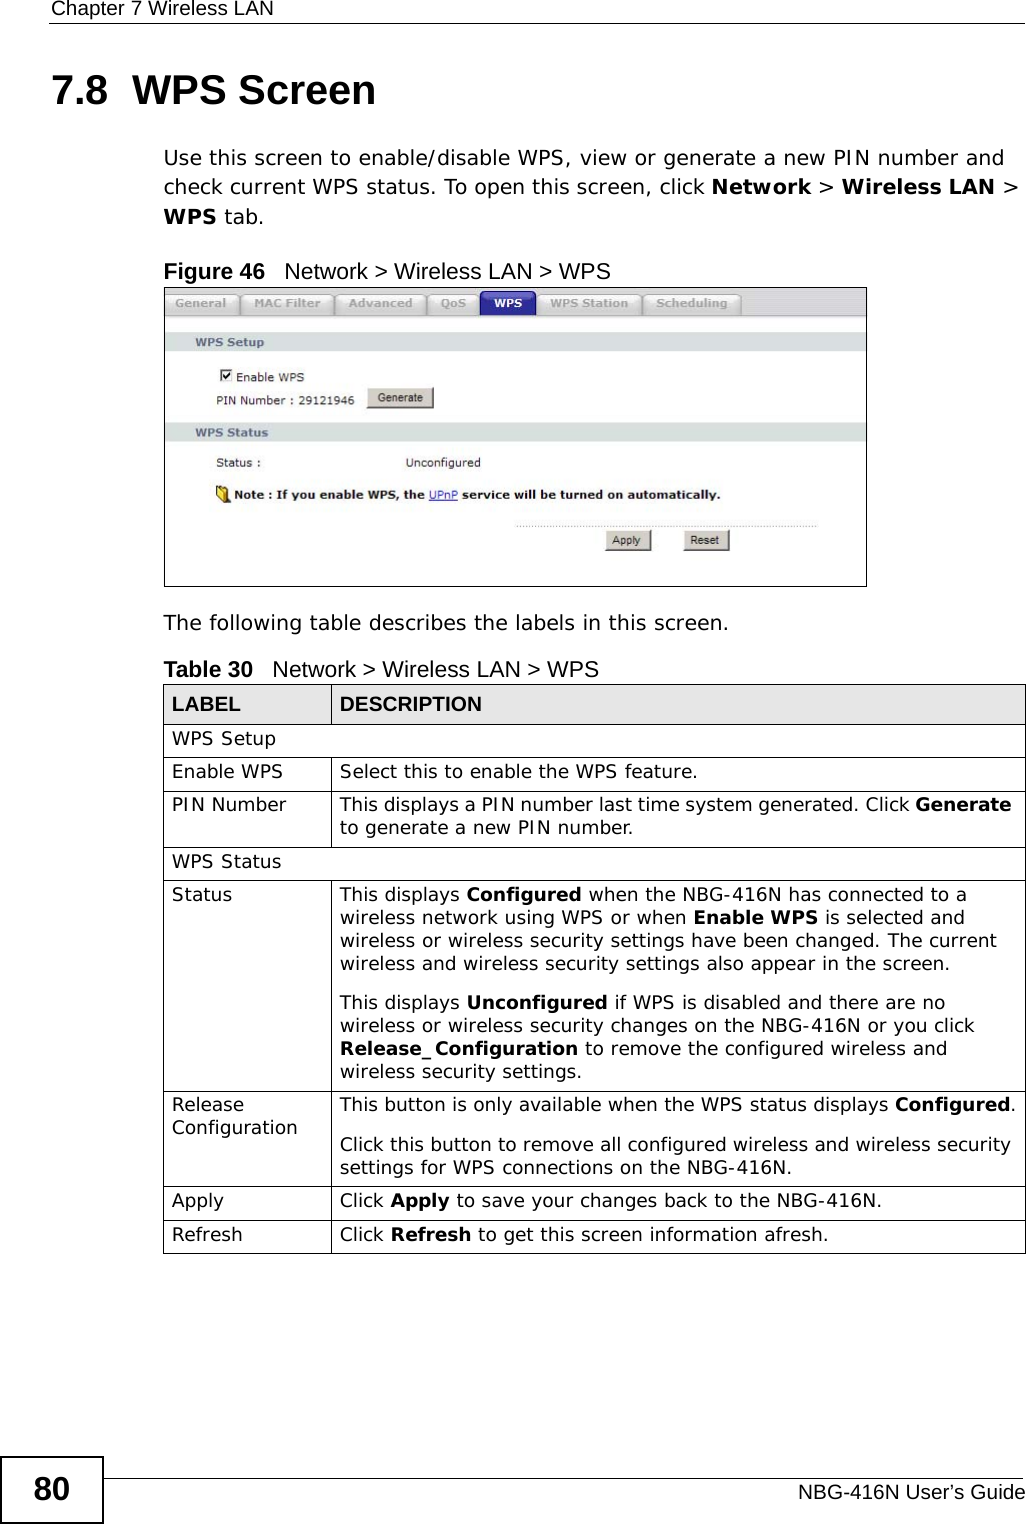 Chapter 7 Wireless LANNBG-416N User’s Guide807.8  WPS ScreenUse this screen to enable/disable WPS, view or generate a new PIN number and check current WPS status. To open this screen, click Network &gt; Wireless LAN &gt; WPS tab.Figure 46   Network &gt; Wireless LAN &gt; WPSThe following table describes the labels in this screen.Table 30   Network &gt; Wireless LAN &gt; WPSLABEL DESCRIPTIONWPS SetupEnable WPS Select this to enable the WPS feature.PIN Number This displays a PIN number last time system generated. Click Generate to generate a new PIN number.WPS StatusStatus This displays Configured when the NBG-416N has connected to a wireless network using WPS or when Enable WPS is selected and wireless or wireless security settings have been changed. The current wireless and wireless security settings also appear in the screen.This displays Unconfigured if WPS is disabled and there are no wireless or wireless security changes on the NBG-416N or you click Release_Configuration to remove the configured wireless and wireless security settings.Release Configuration This button is only available when the WPS status displays Configured.Click this button to remove all configured wireless and wireless security settings for WPS connections on the NBG-416N.Apply Click Apply to save your changes back to the NBG-416N.Refresh Click Refresh to get this screen information afresh.